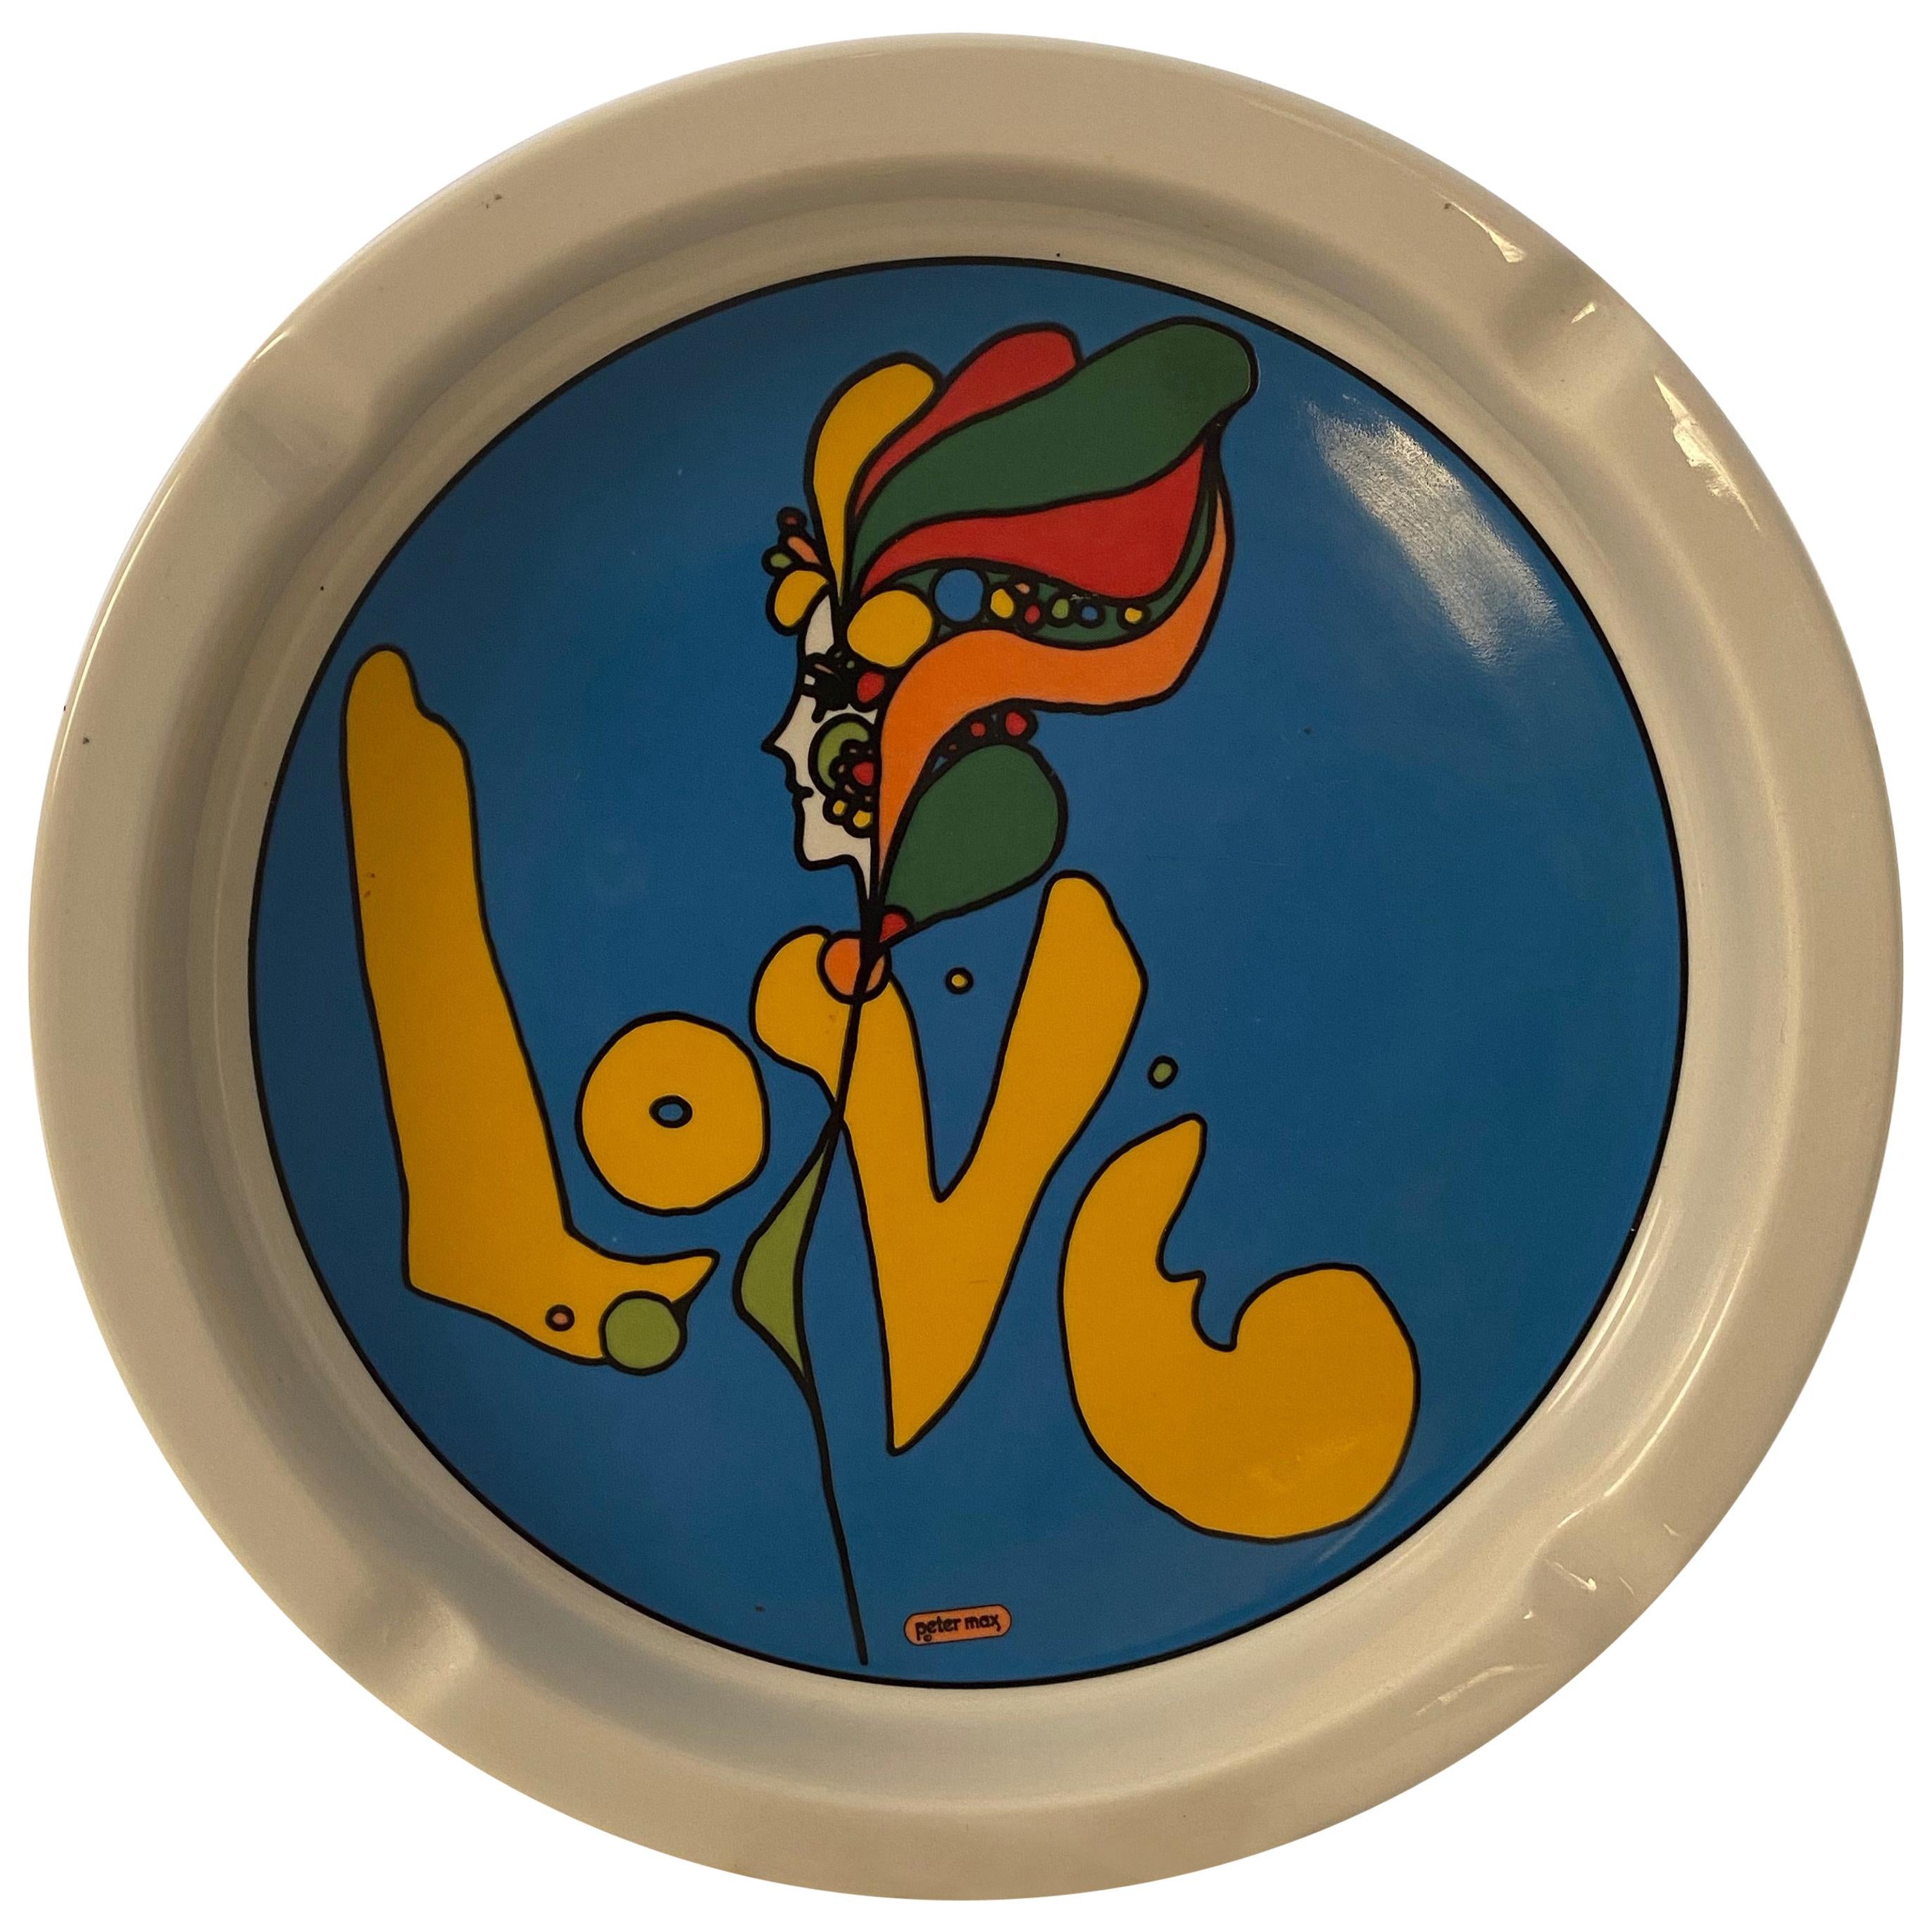 Peter Max Psychedelic 1960s Love Ashtray